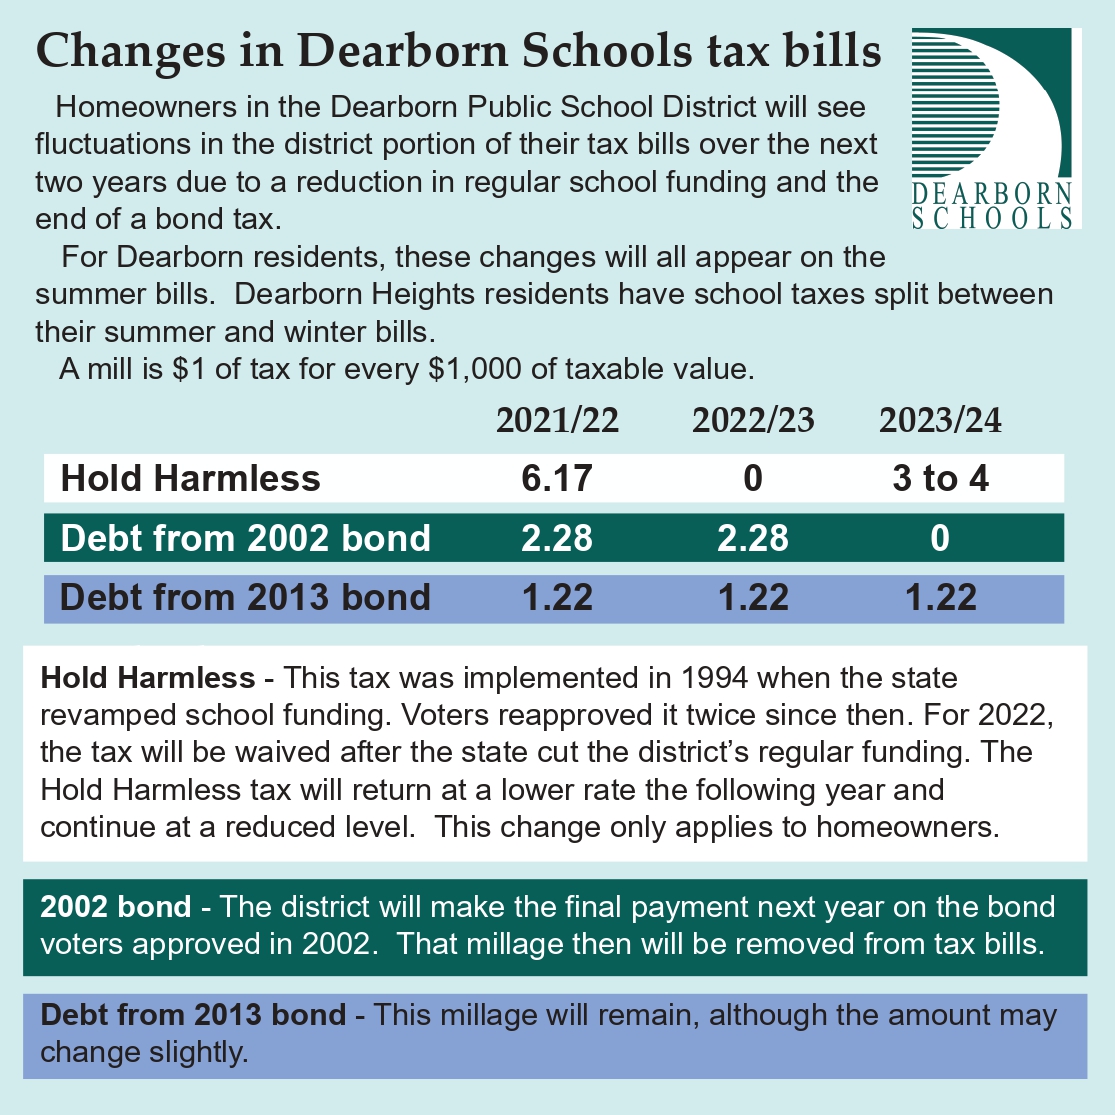 Changes in Dearborn Schools tax bills. Homeowners in the Dearborn Public School District will see fluctuations in the district portion of their tax bills over the next two yeas due to a reduction in regular school funding and the end of a bond tax. For Dearborn residents, these changes will all appear on the summer bills.  Dearborn Heights residents have school taxes split between their summer and winter bills. A mill is $1 of tax for every $1,000 of taxable value. Hold Harmless  2021/22- 6.17 mills 2022/23 - 0 2023/24 - 3 to 4 mills Debt from 2002 bond 2021/22- 2.28 mill 2022/23 - 2.28 2023/24 - 0 Debt from 2013 bond 2021/22 - 1.22 mill 2022/23 - 1.22 mill 2023/24 - 1.22 mill  Hold Harmless - This tax was implemented in 194 when the state revamped school funding. Voters reapproved it twice since then.  For 2022 the tax will be waived afte rthe state cut the district's regular funding.  The Hold Harmless tax will return at a lower rate the following year and continue at a reduced level.  This change only applies to homeowners. 2022 bond - The district will make the final payment next year on the bond voters approved in 2002. That millage will be removed from tax bills. Debt from 2013 bond - This millage will remain, although the amount may change slightly.